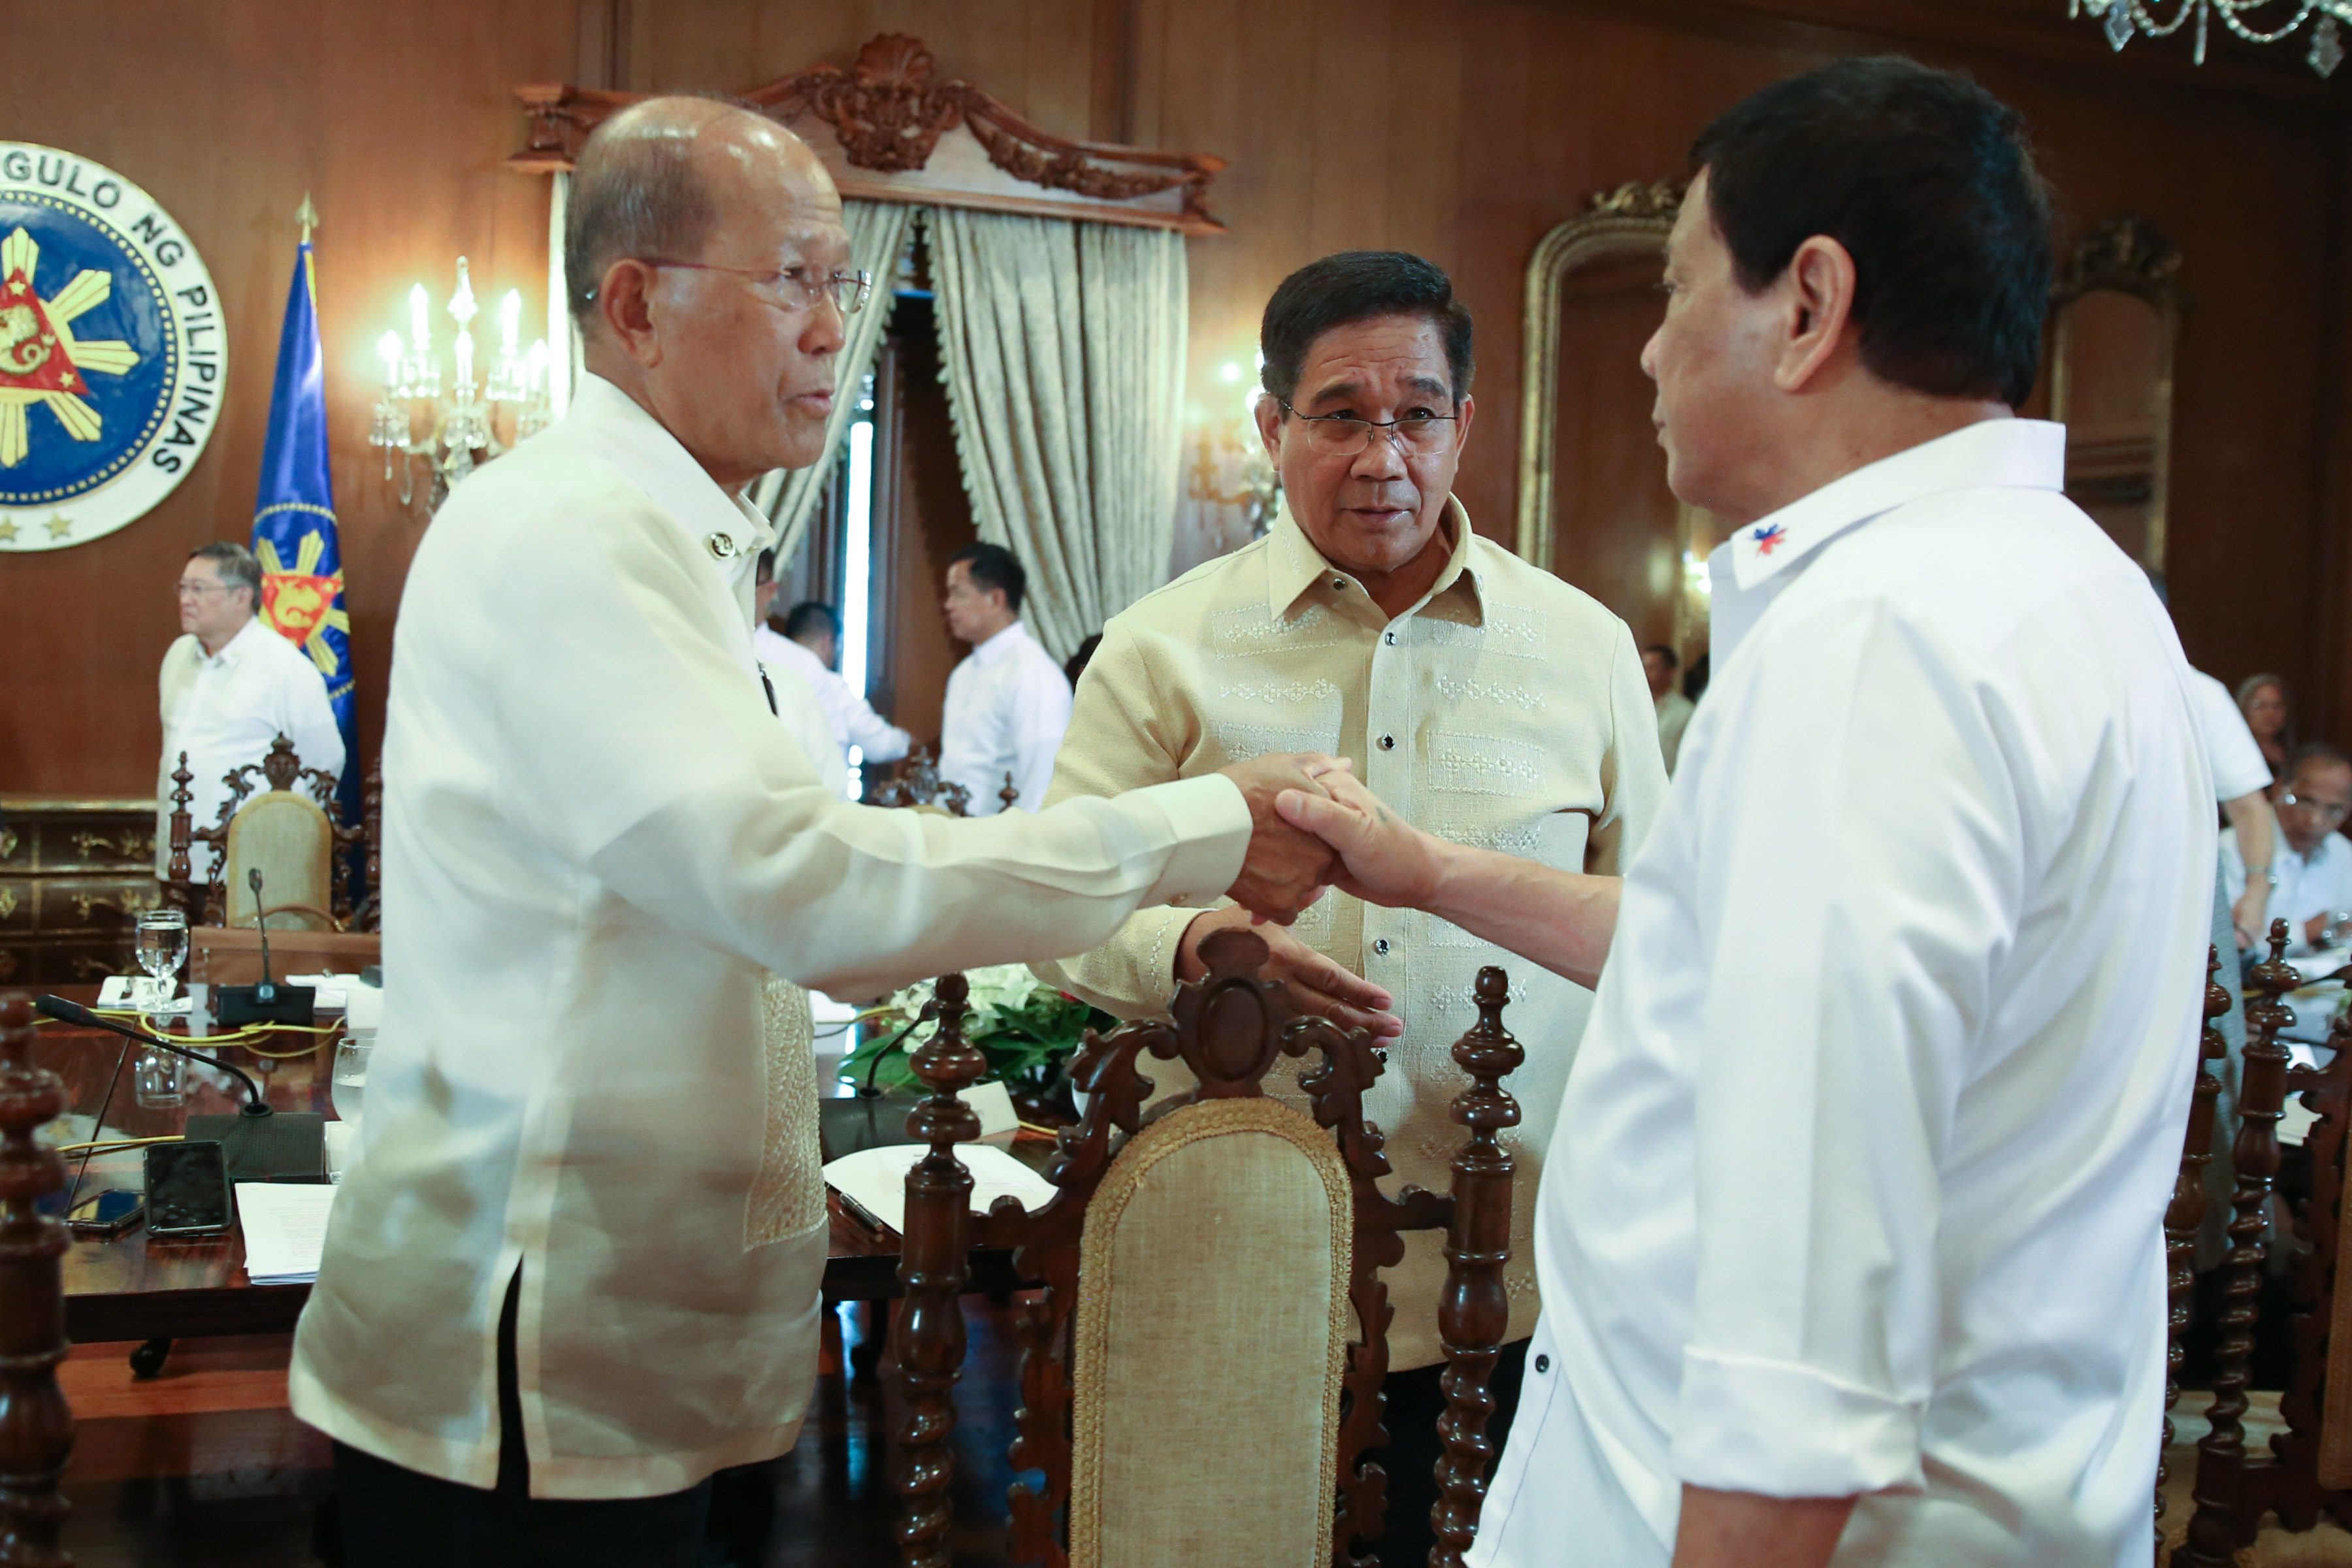 SECURITY ADVISERS. President Rodrigo Duterte is greeted by Secretary of National Defense Secretary Delfin Lorenzana and National Security Adviser Hermogenes Esperon Jr upon his arrival for the 13th Cabinet Meeting. Malacañang photo 